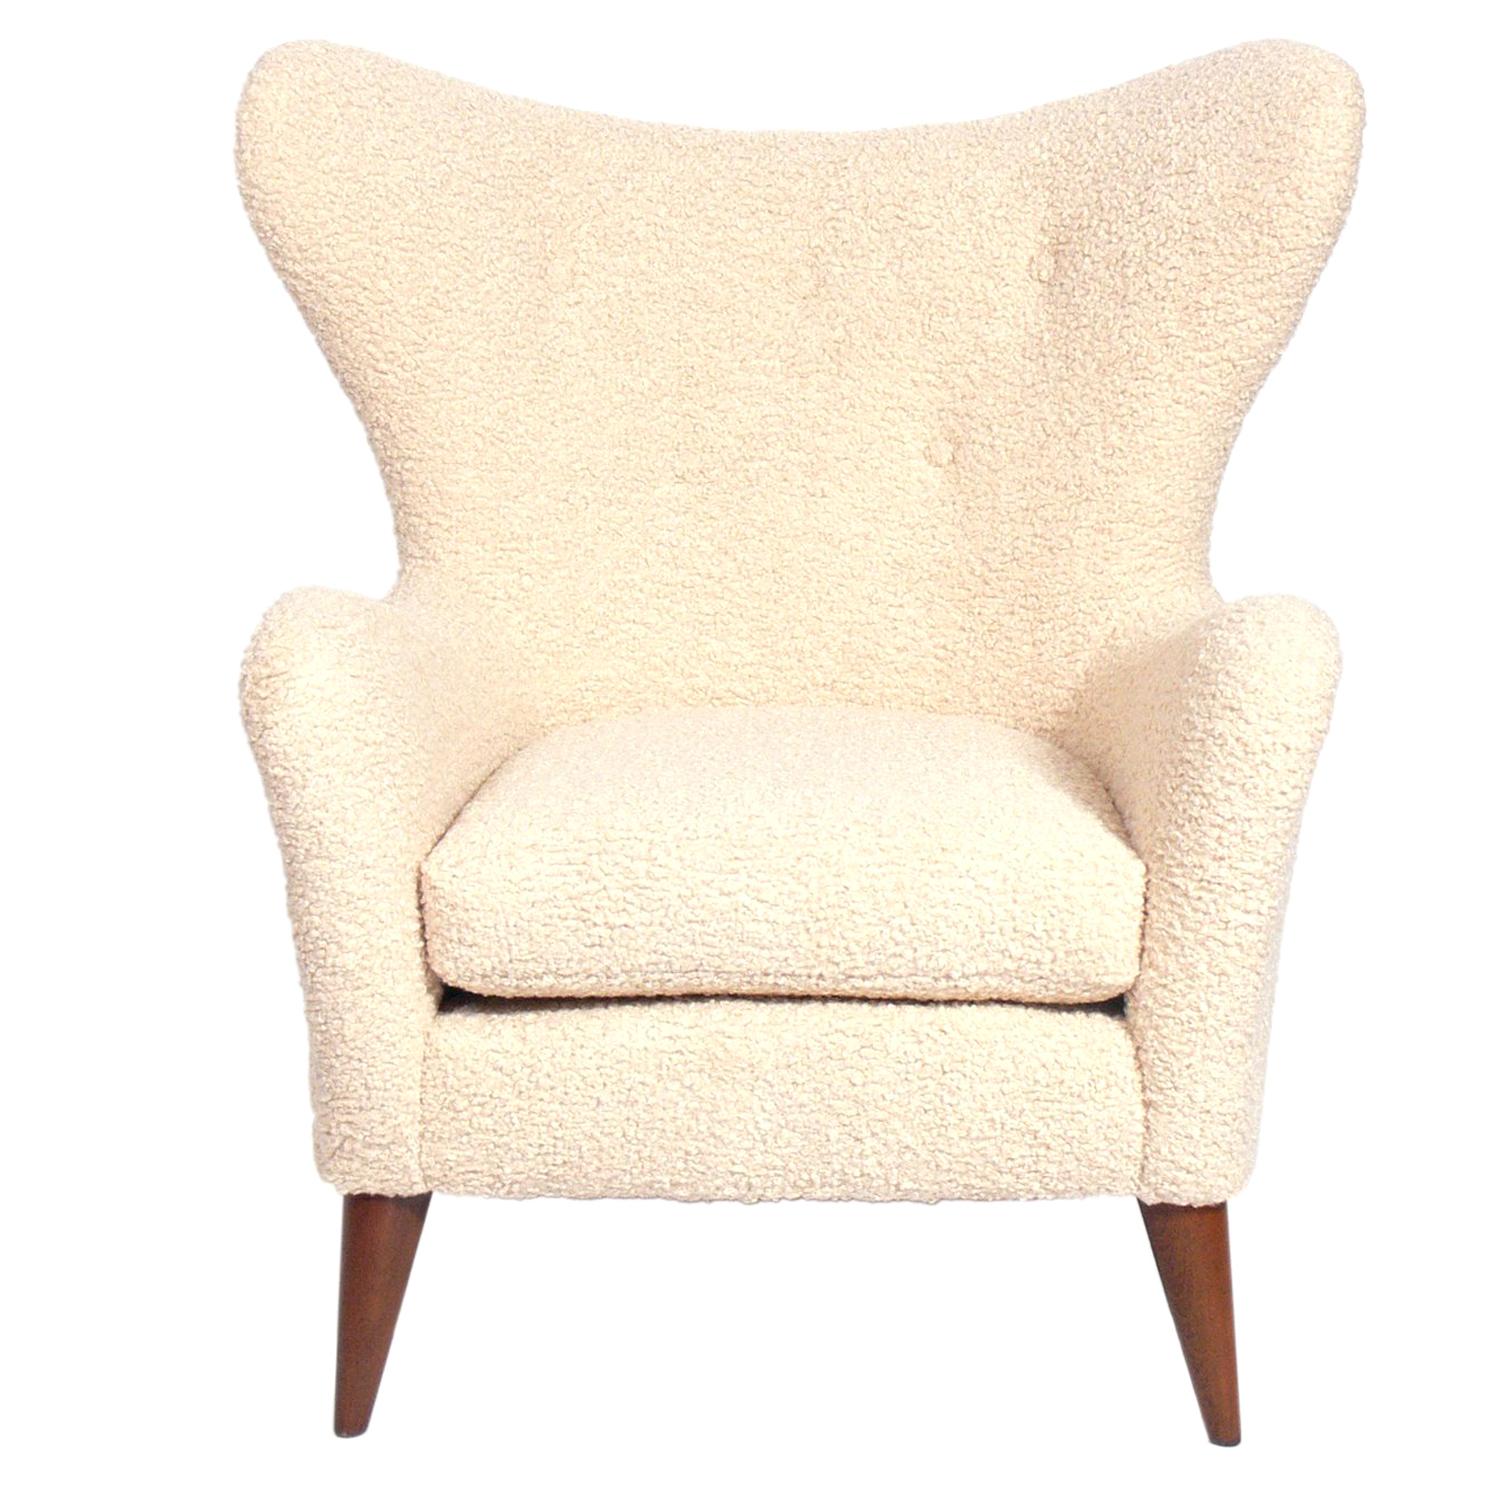 Curvaceous Danish Modern Lounge Chair in Shearling